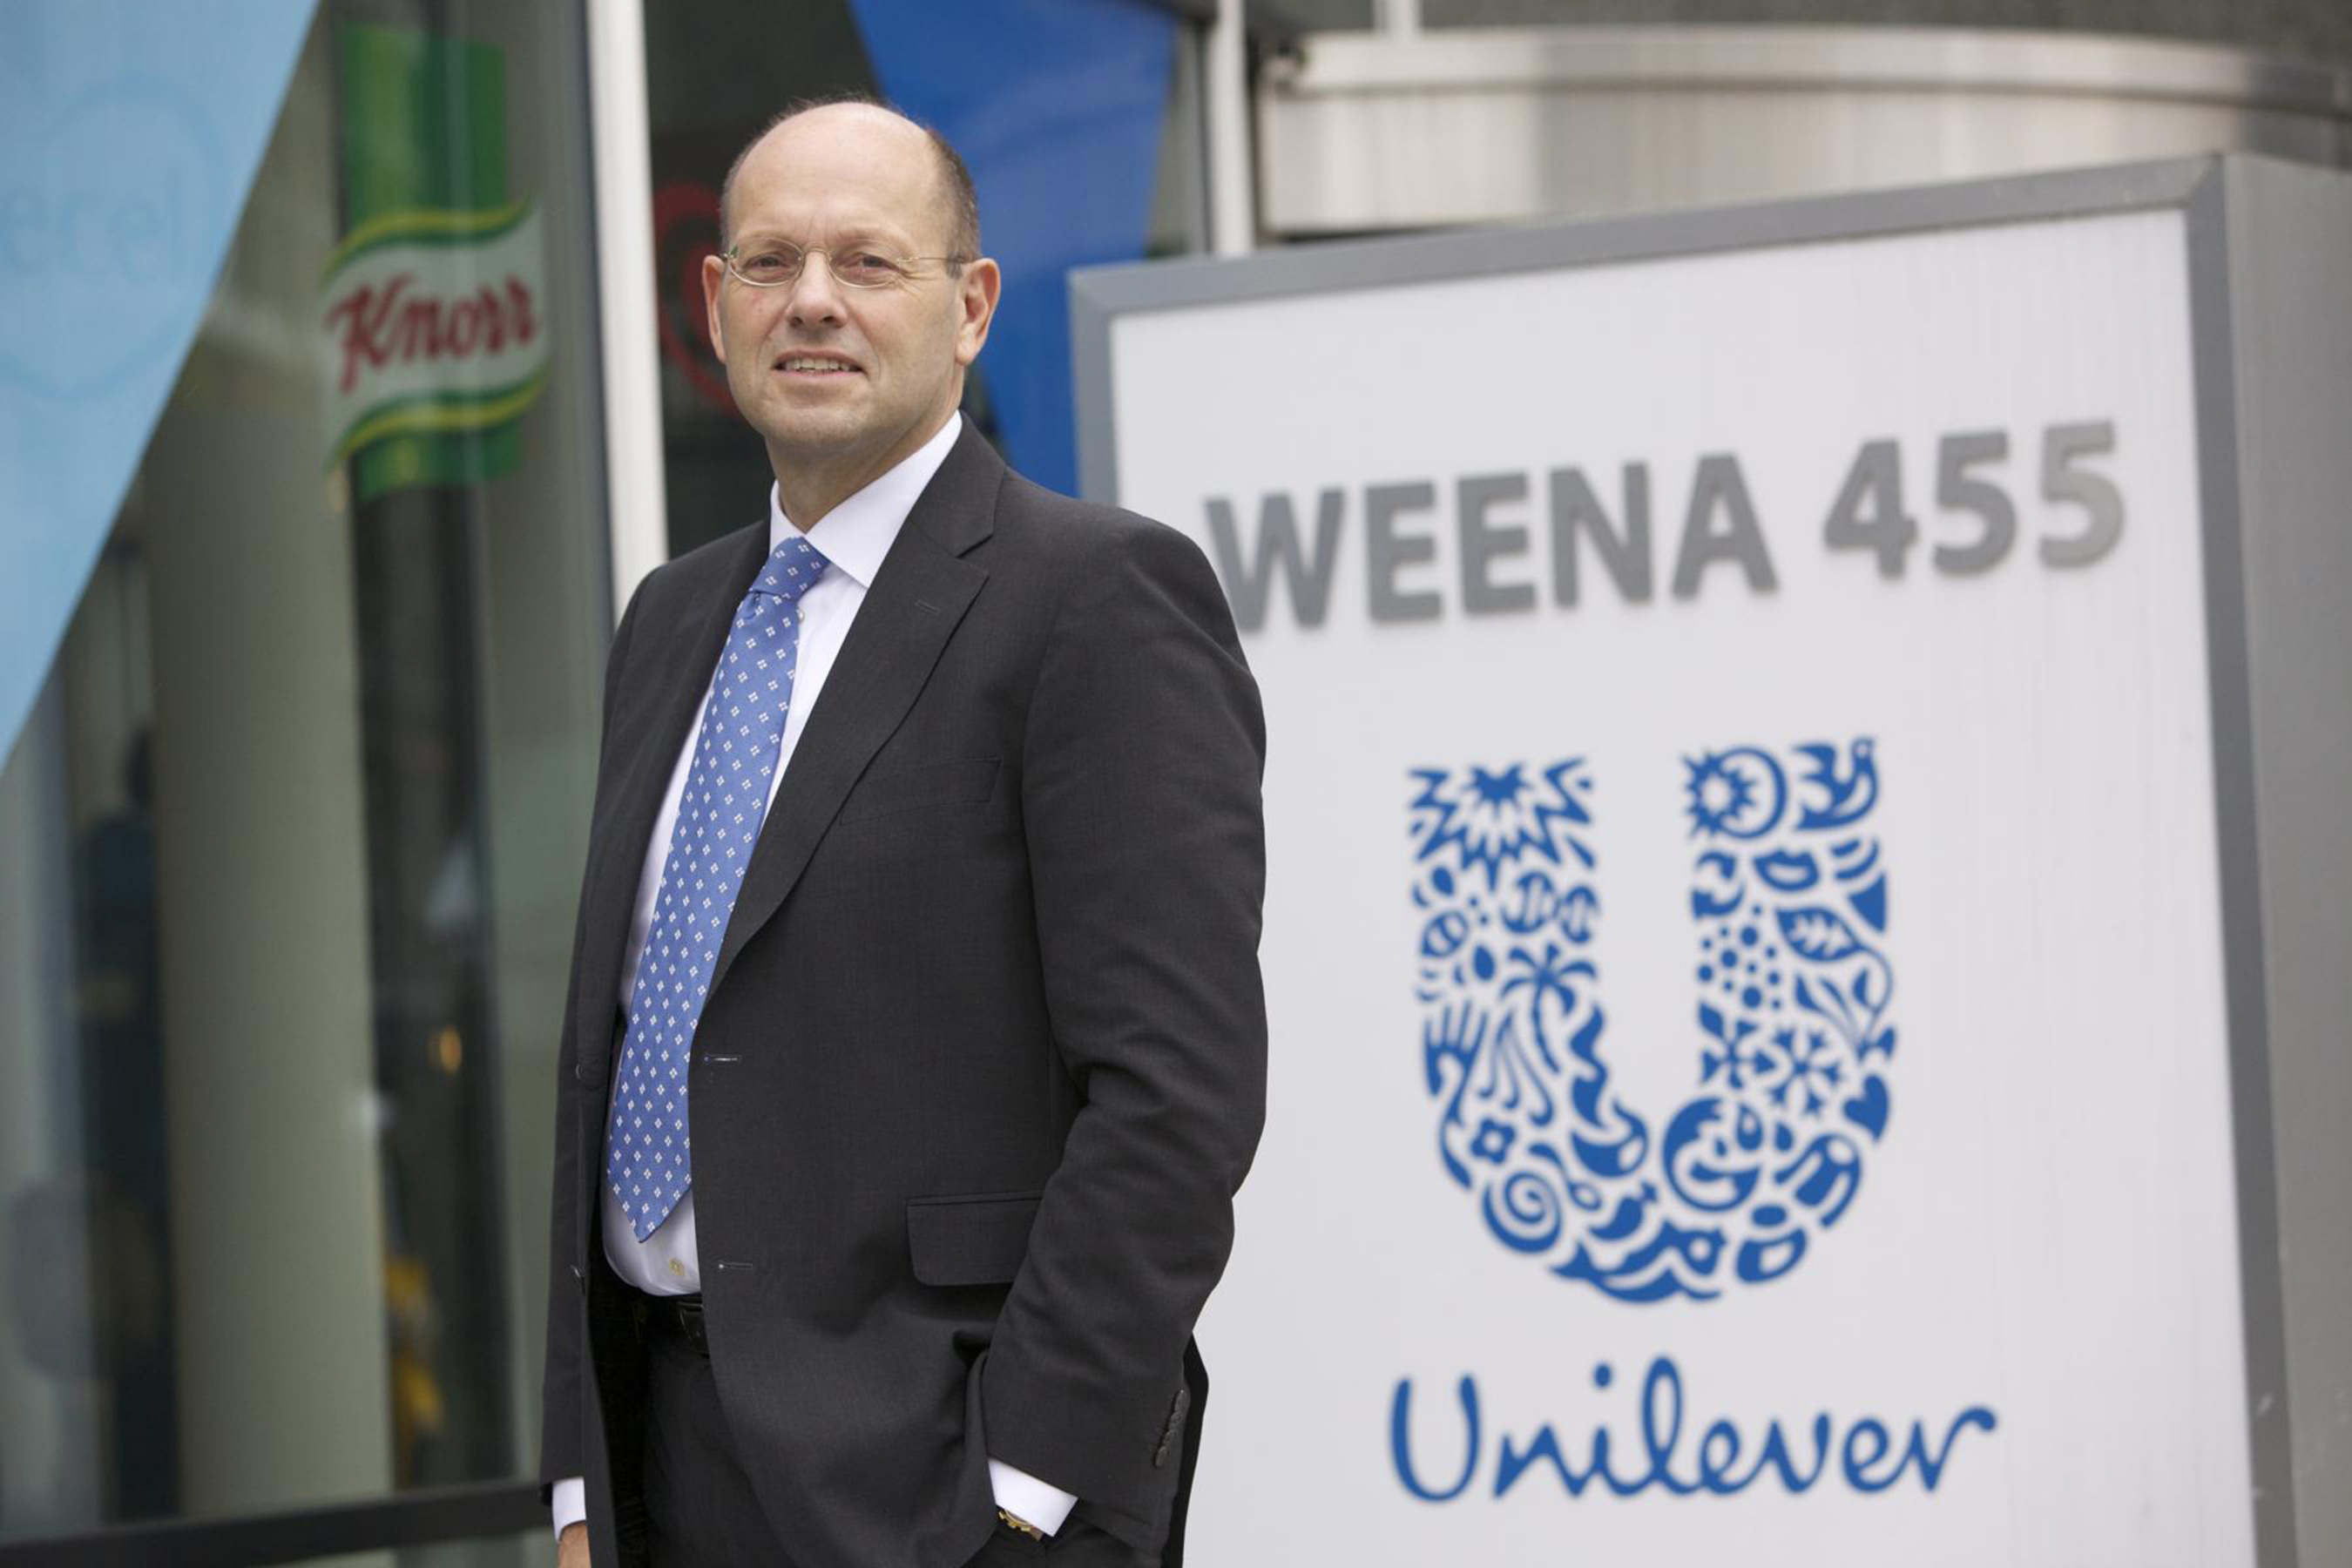 Leo Oosterveer, CEO of Unilever Food Solutions, and winner of the 2014 Augie Leadership Award for Sustainability and Food Ethics from the Culinary Institute of America. (PRNewsFoto/Unilever Food Solutions )